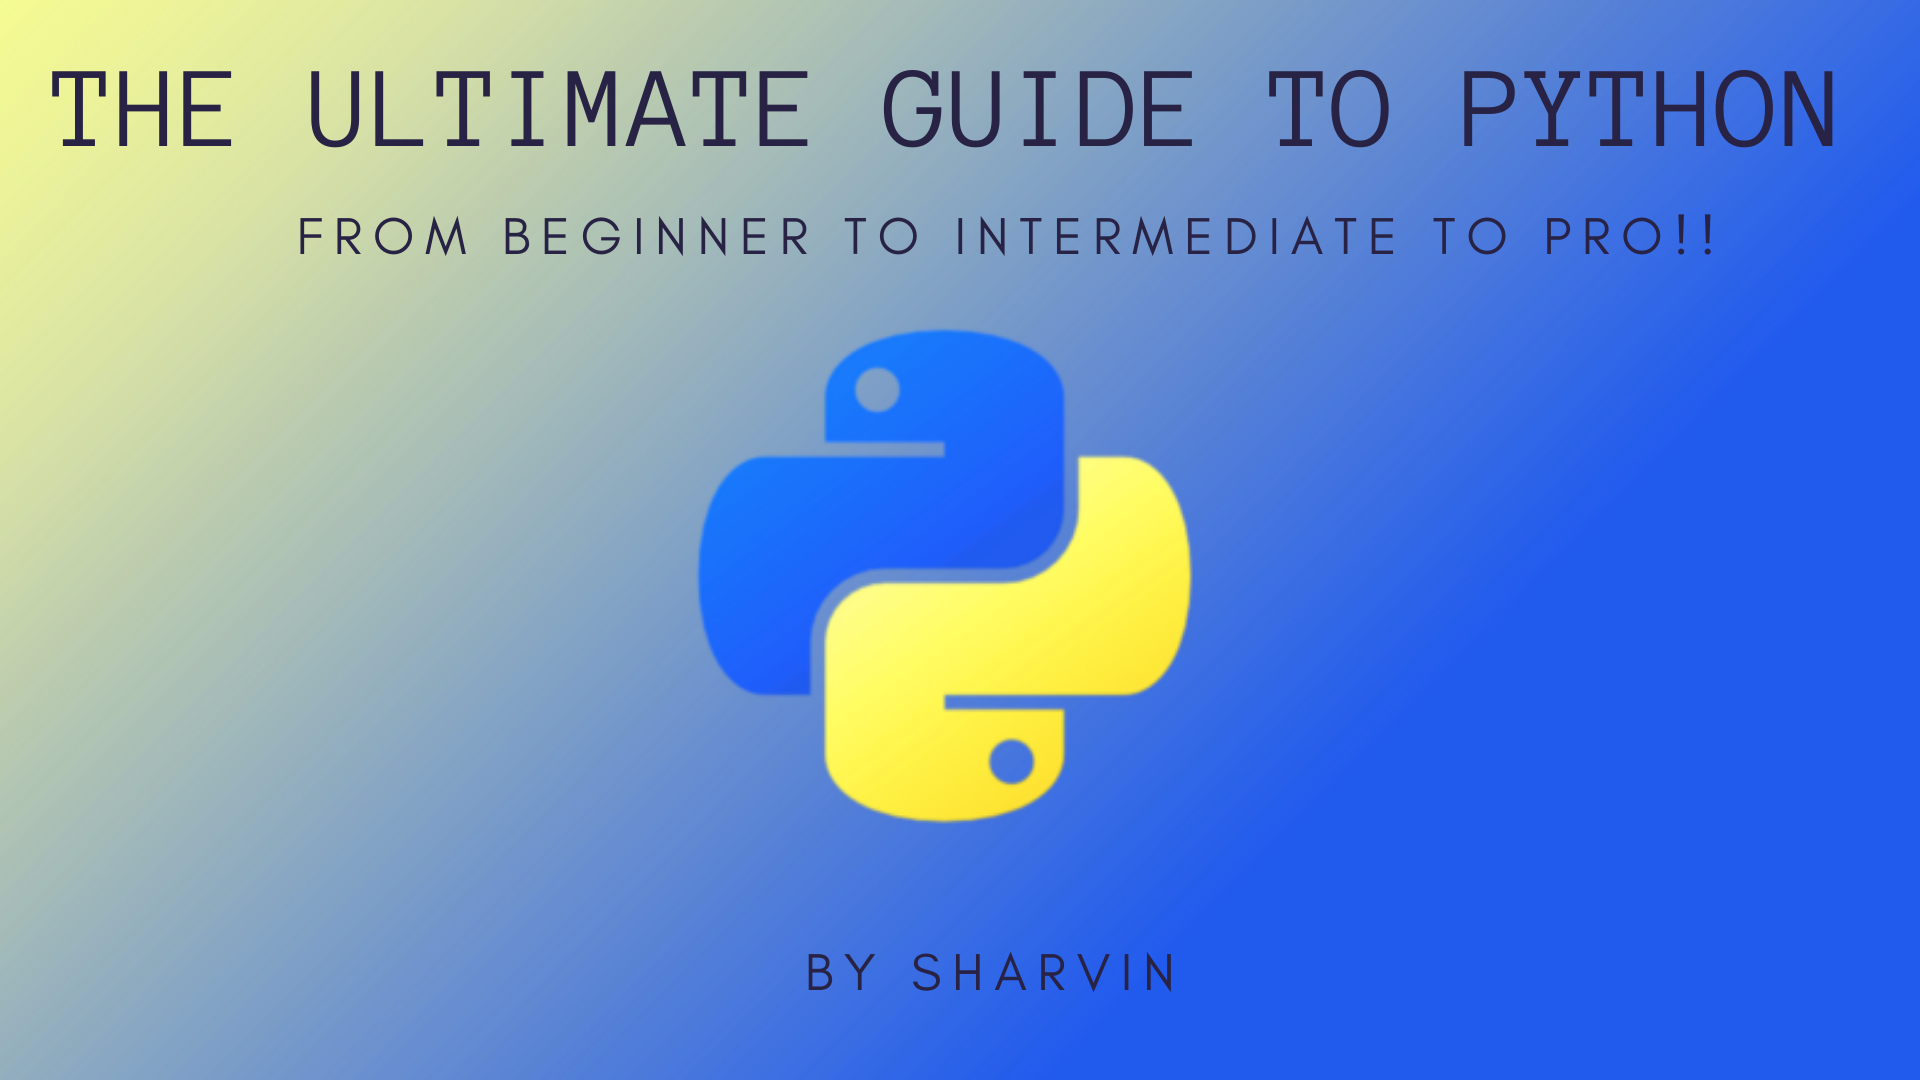 The Ultimate Guide to Python: How to Go From Beginner to Pro